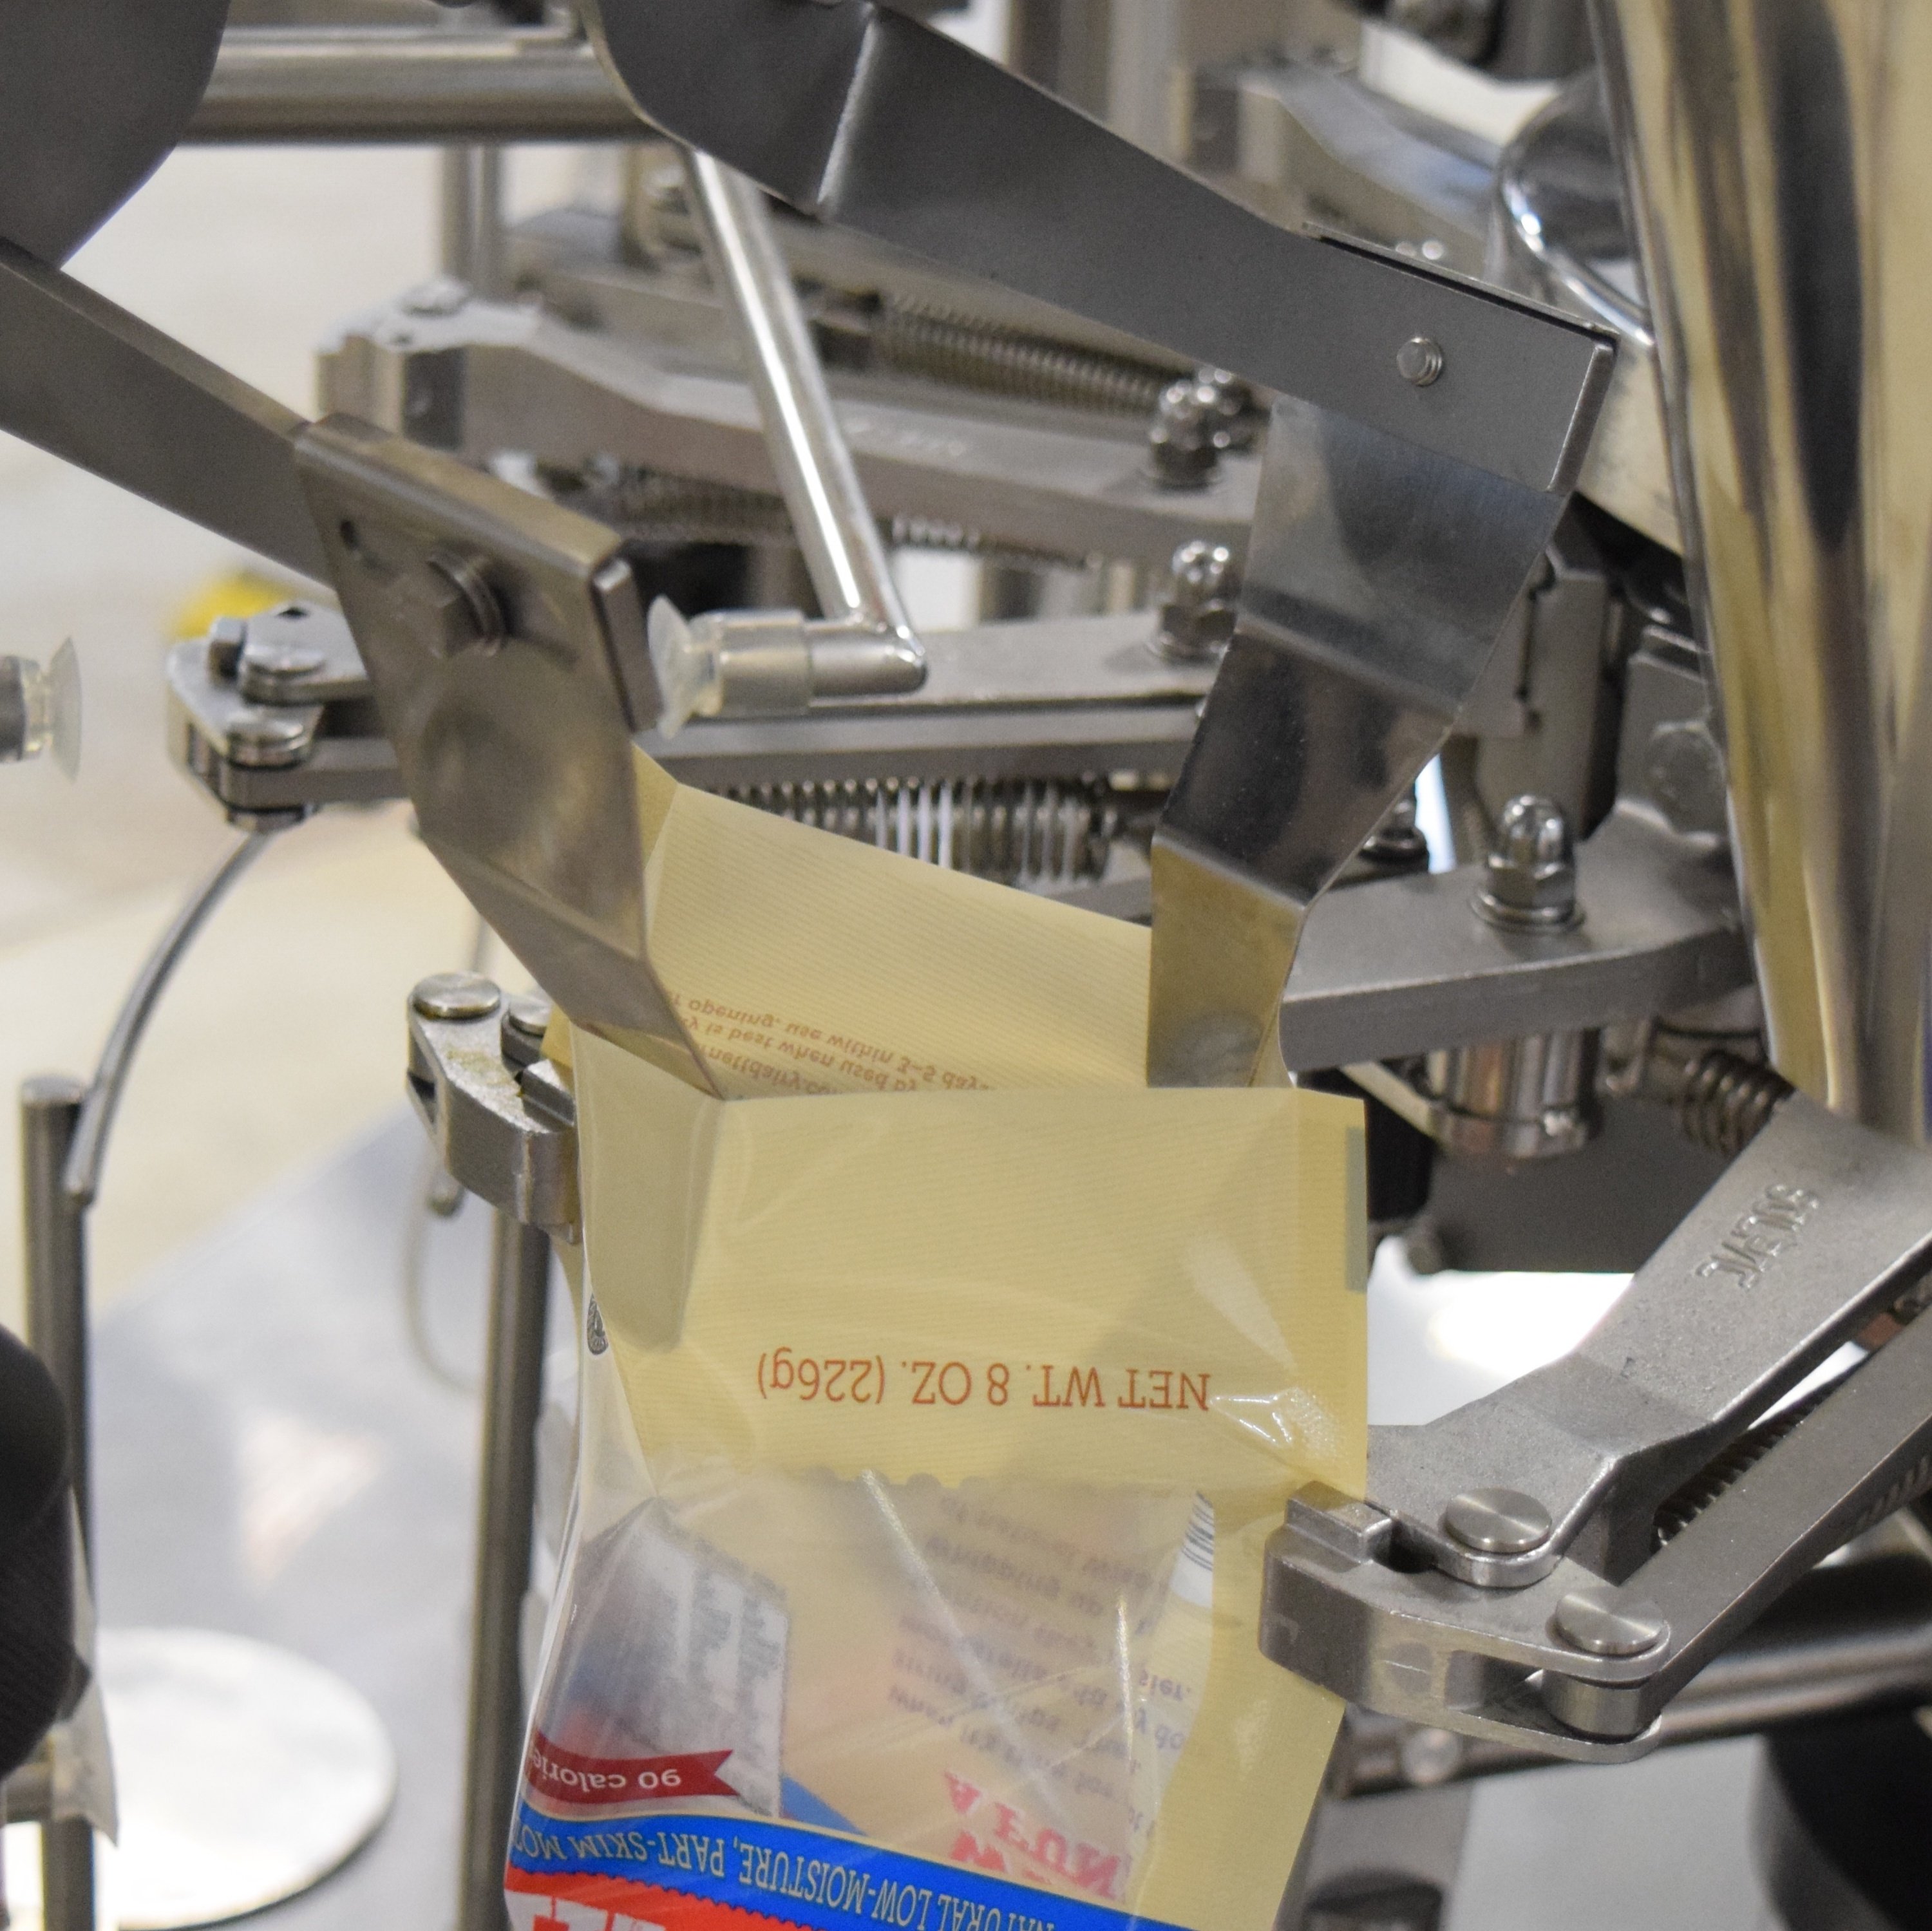 Premade_Pouch_Packaging_Machine_Bag_Opening_SImplex-707409-edited.jpg